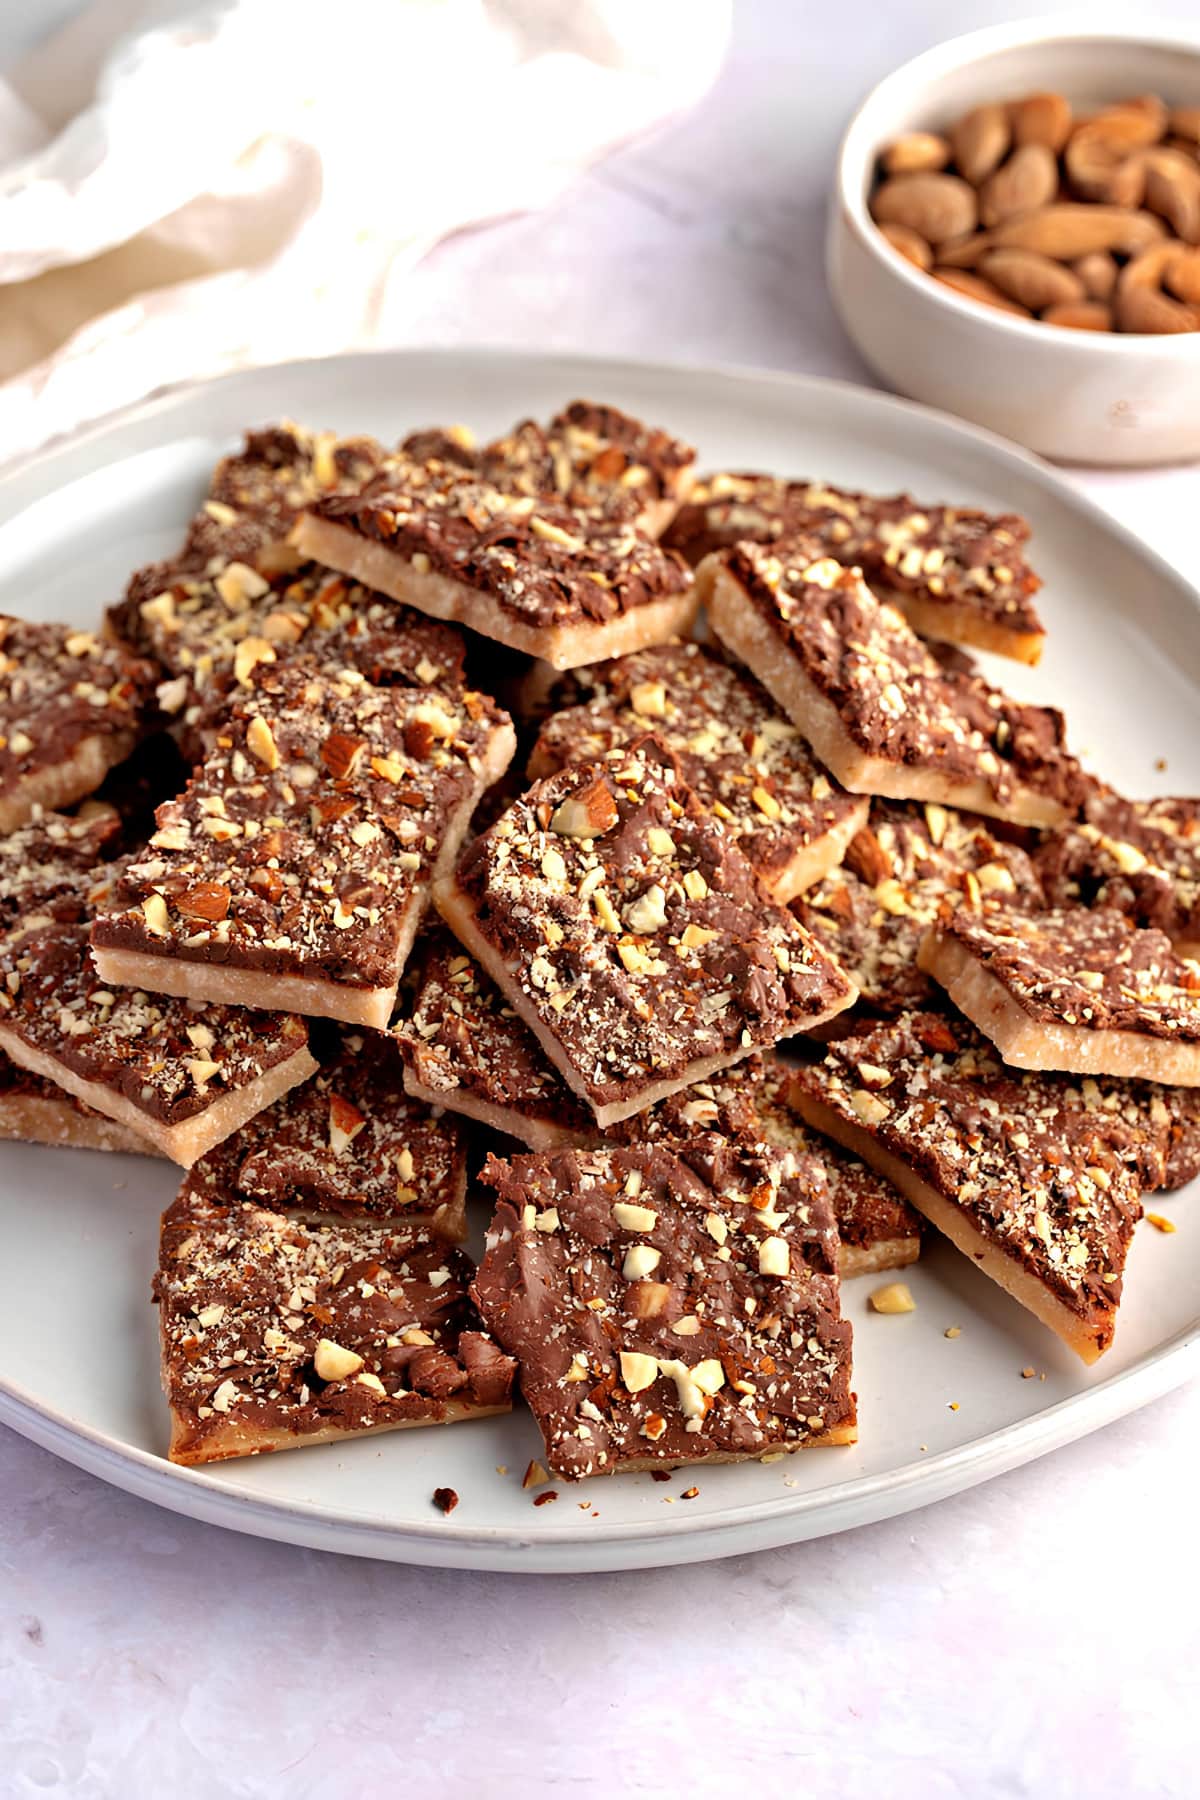 Homemade Almond Roca Bars Stacked on a Plate